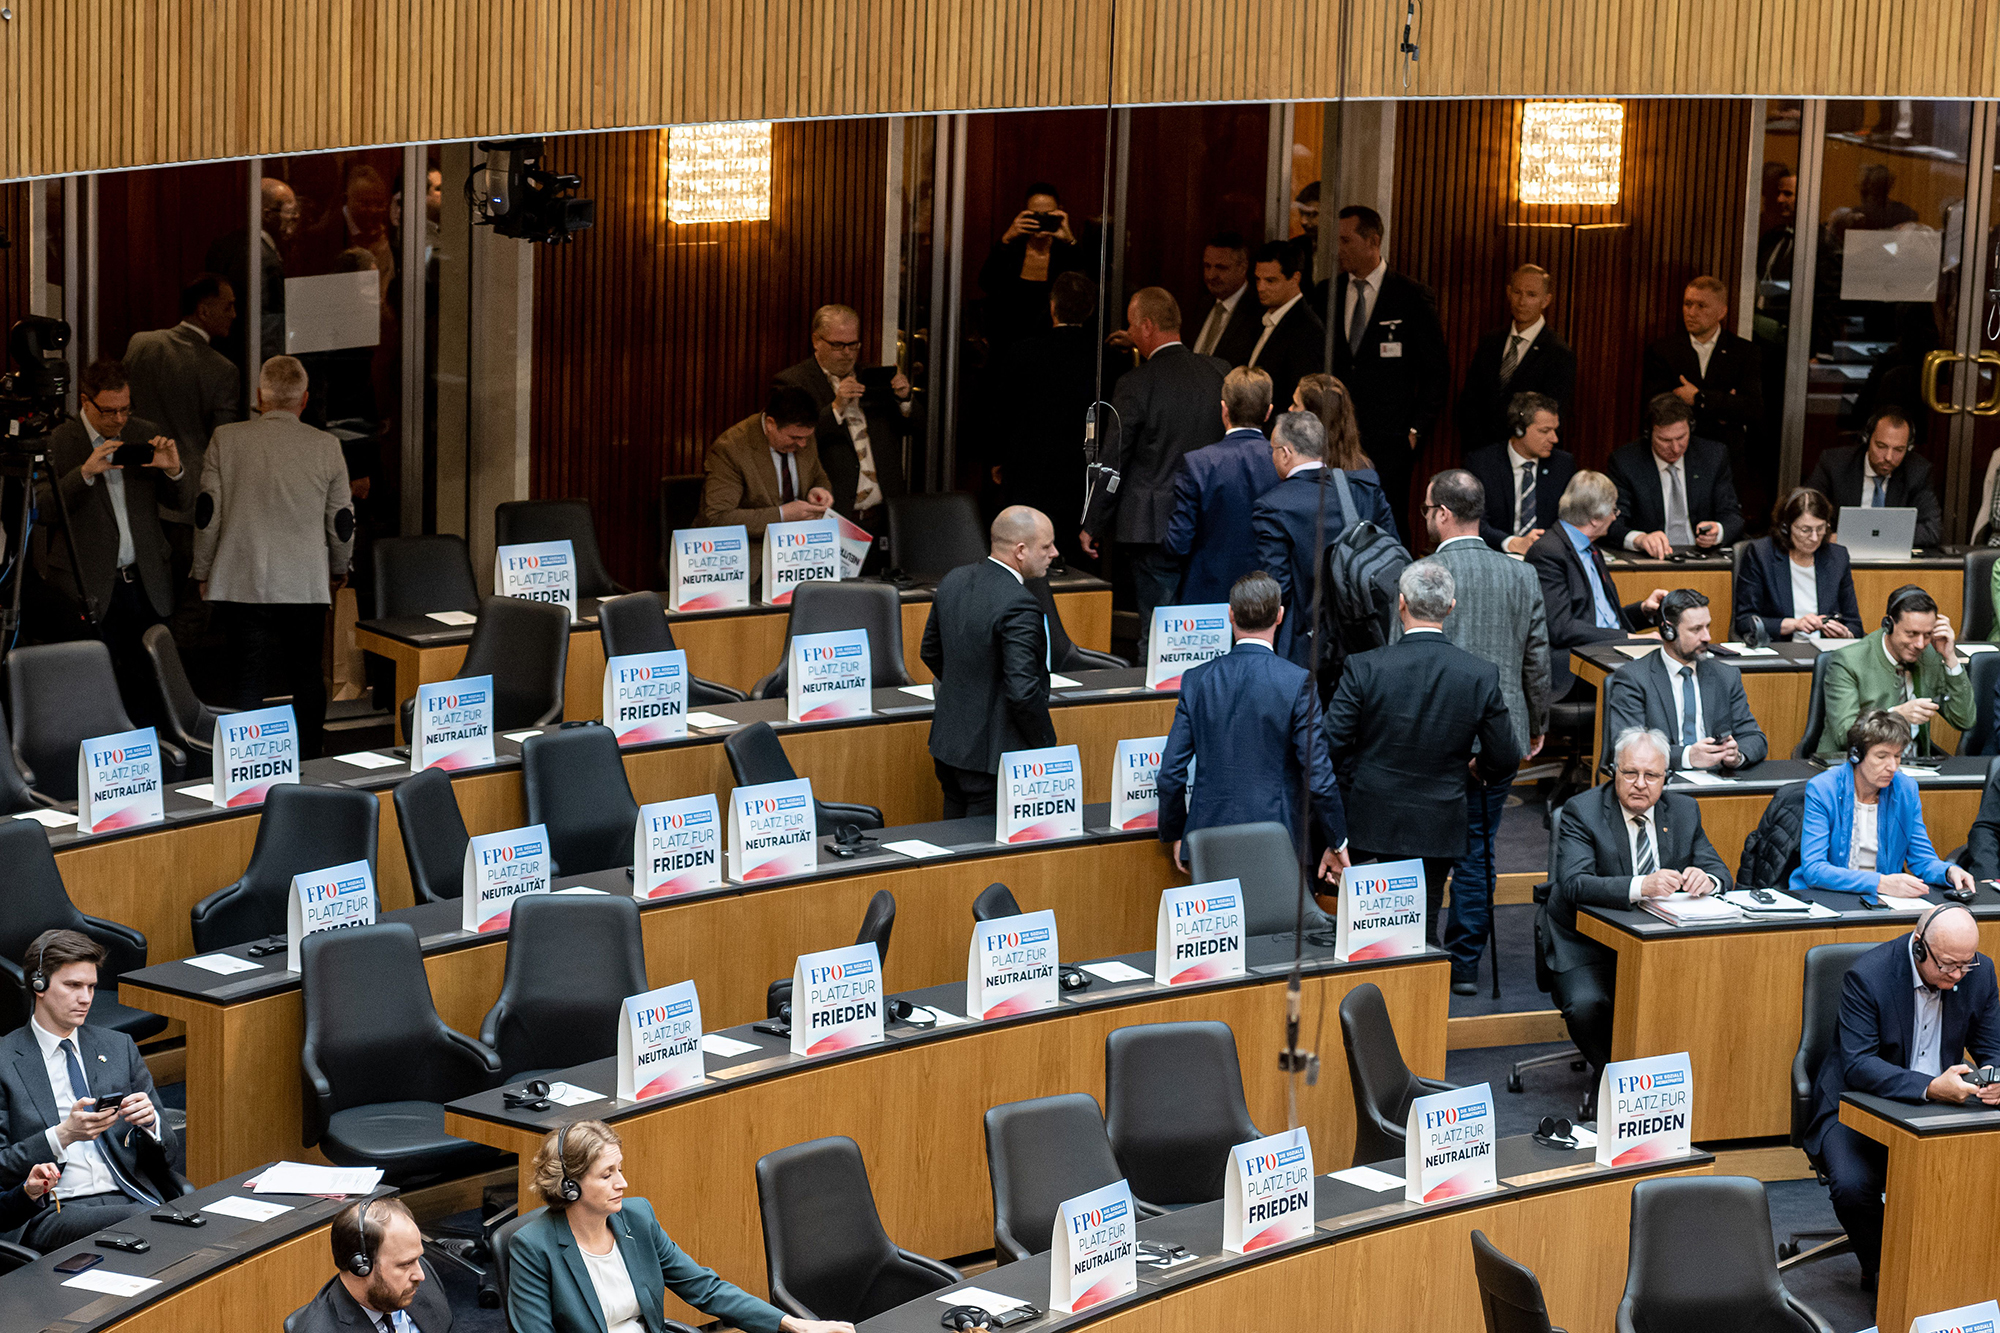 Austrian MPs from the right-wing Austrian Freedom Party (FPOe) leave the assembly room as a sign of protest during a video address by Ukraine's President Volodymyr Zelensky amid a session of the Austrian National Council in Vienna, Austria, on March 30.